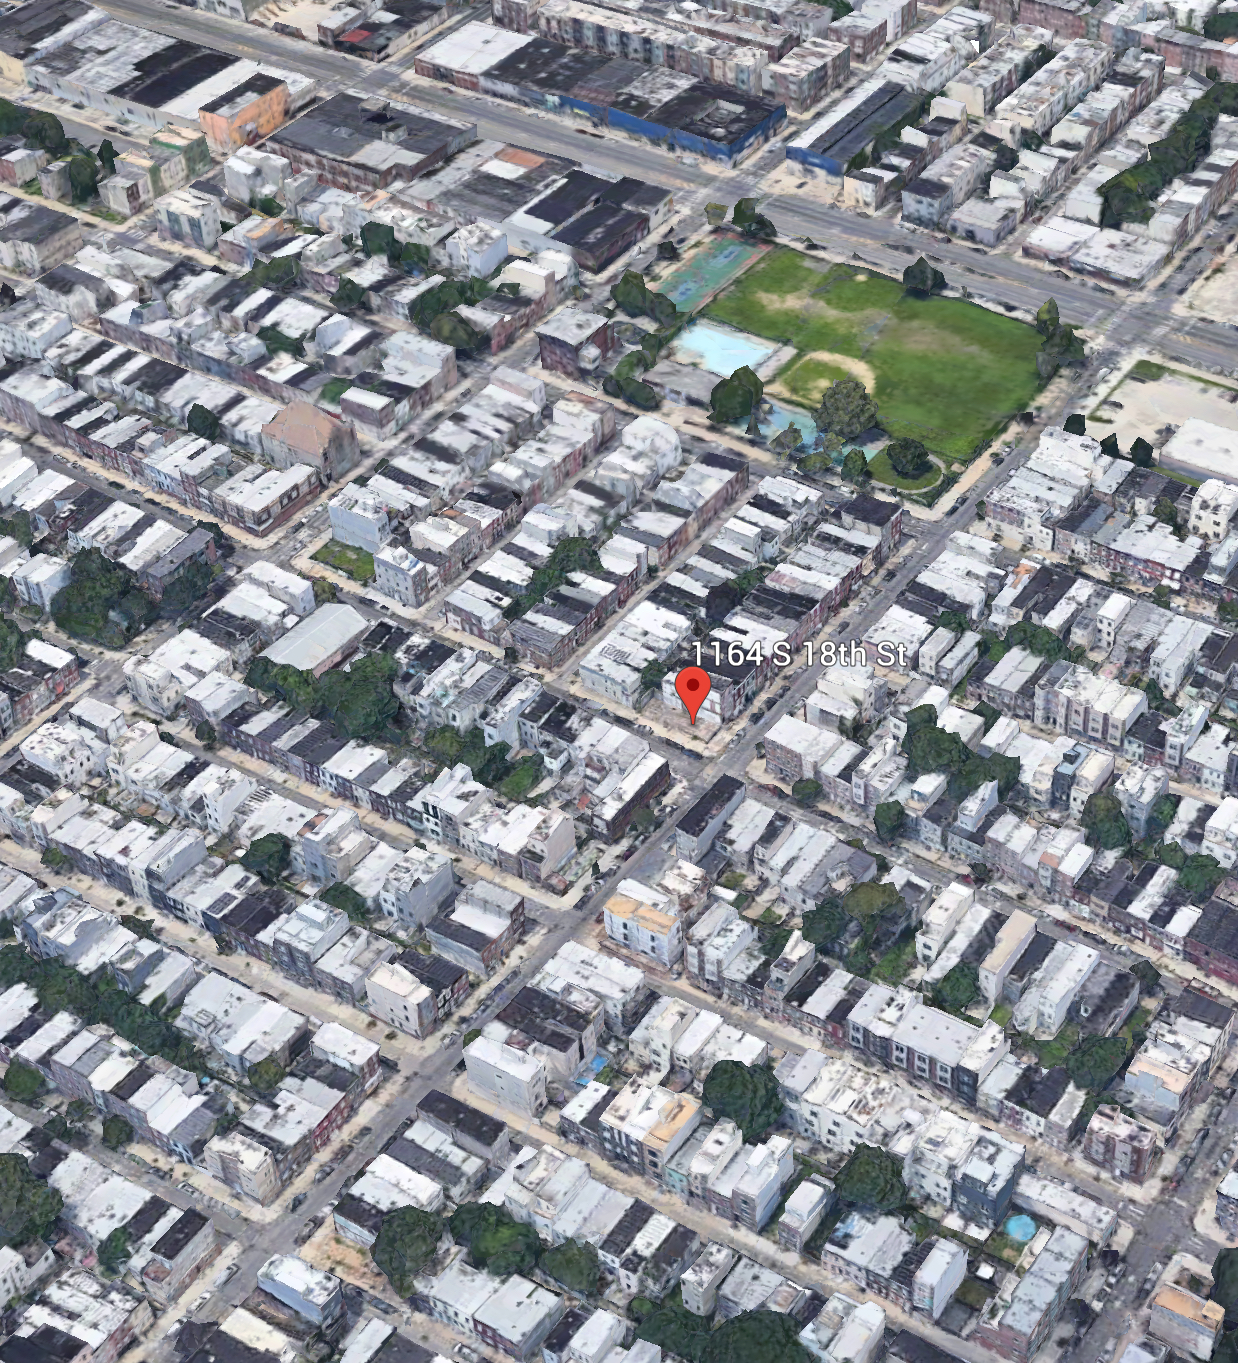 Aerial view of 1164 South 18th Street. Credit: Google Maps